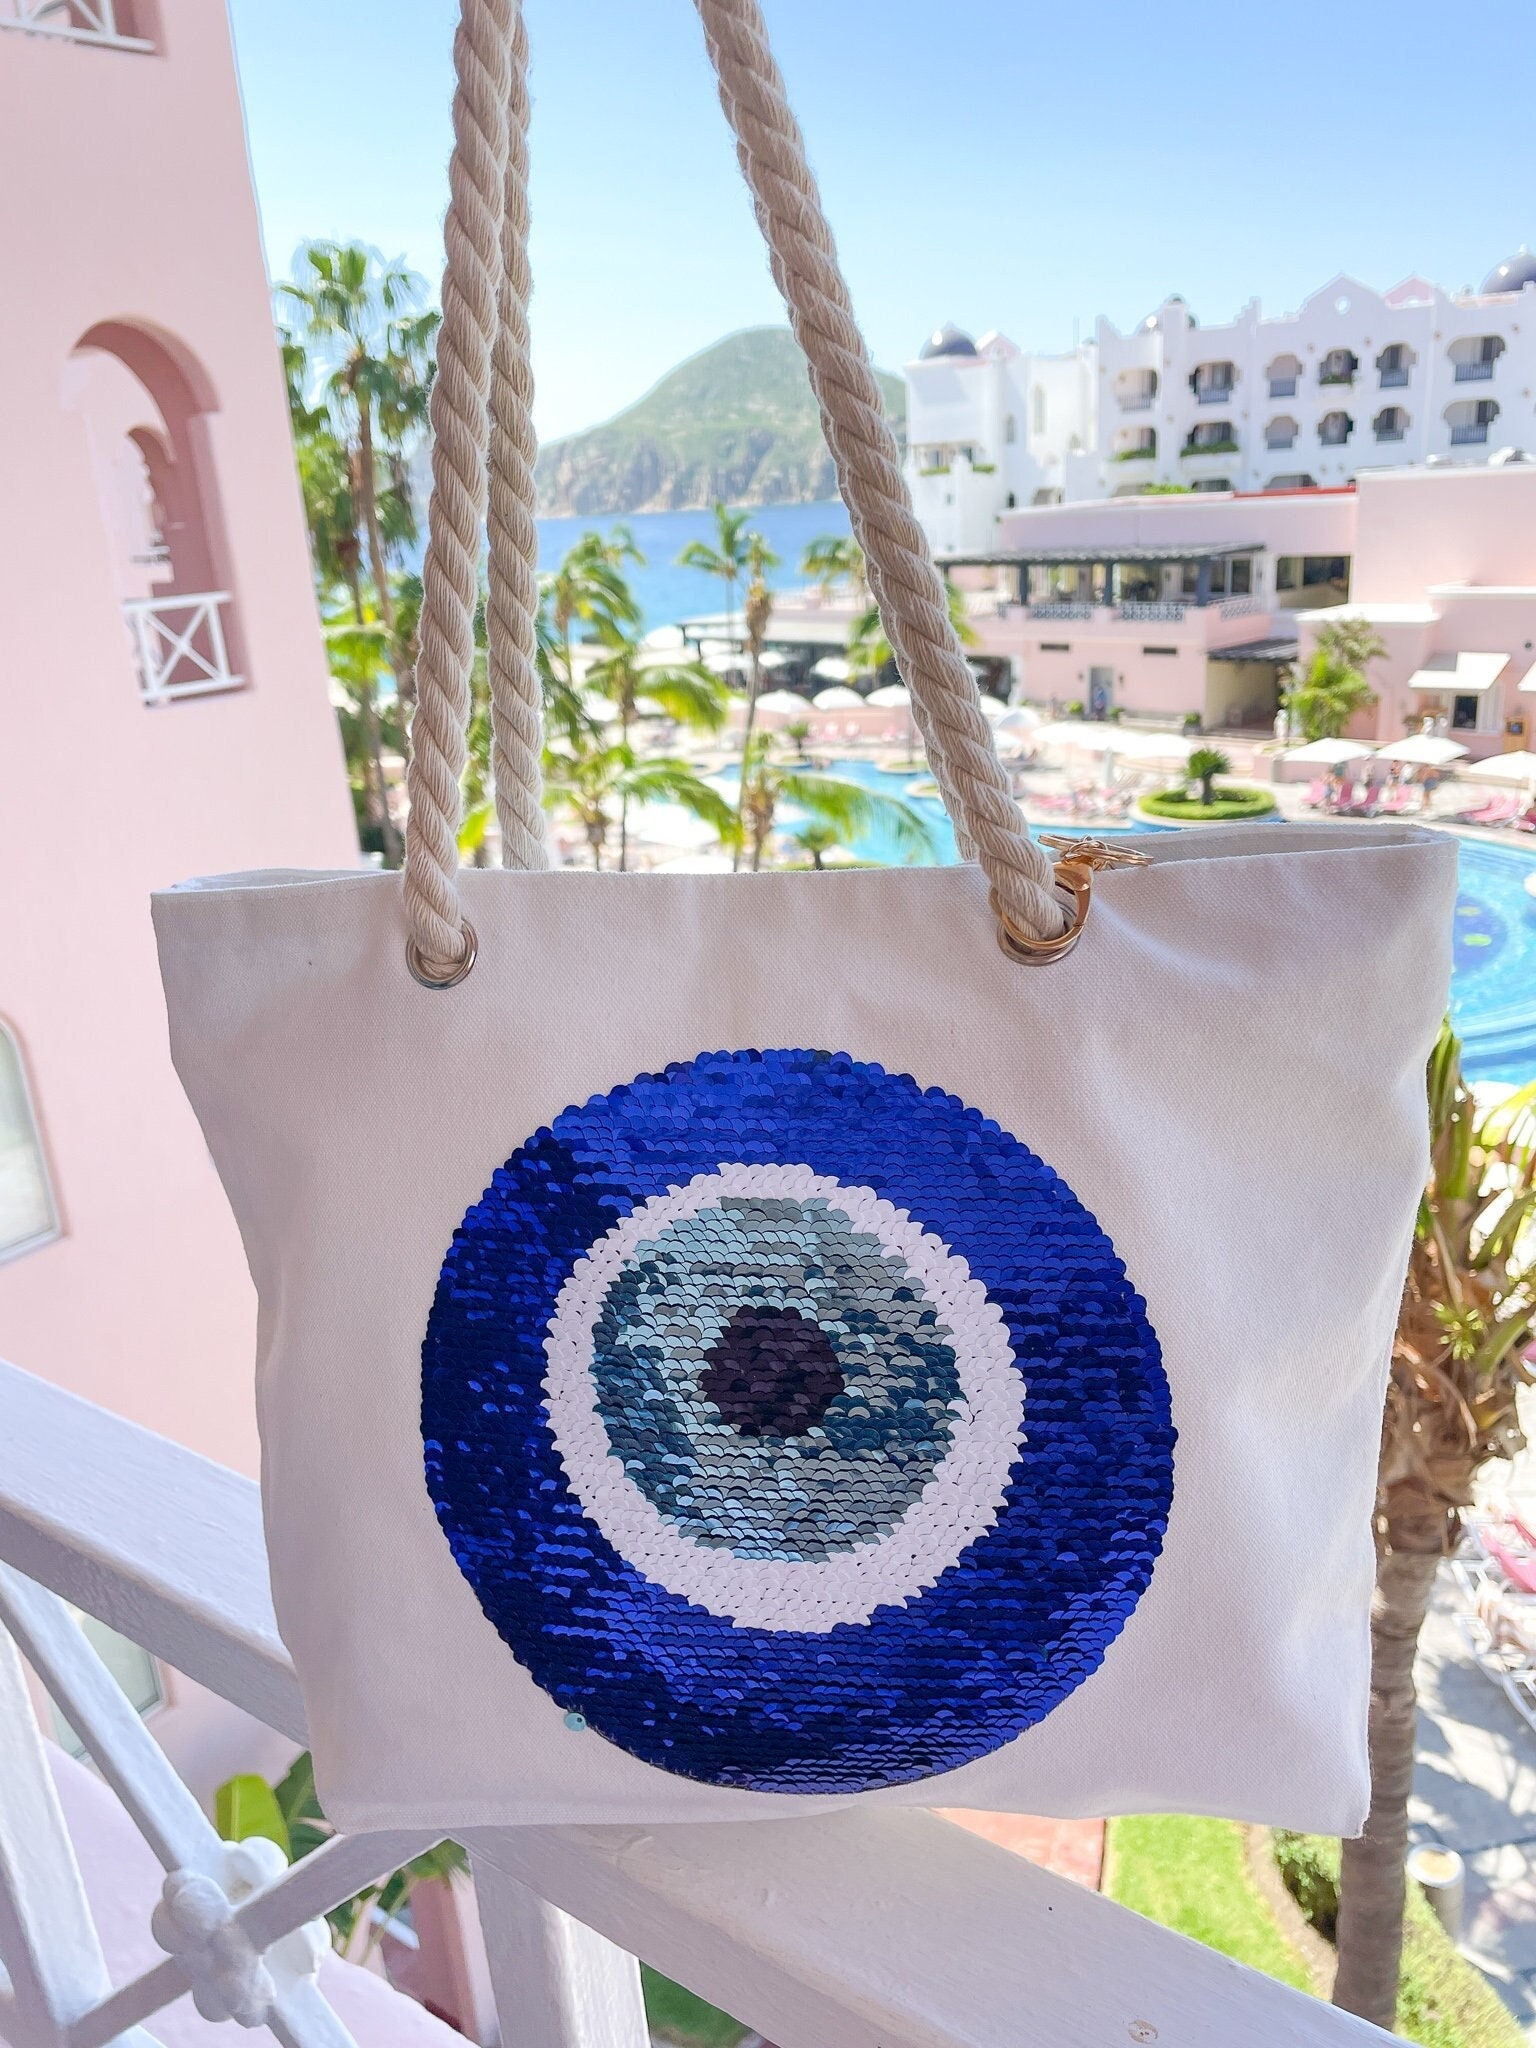 Hand Painted Straw Bag / Beach Tote with Eye Paint